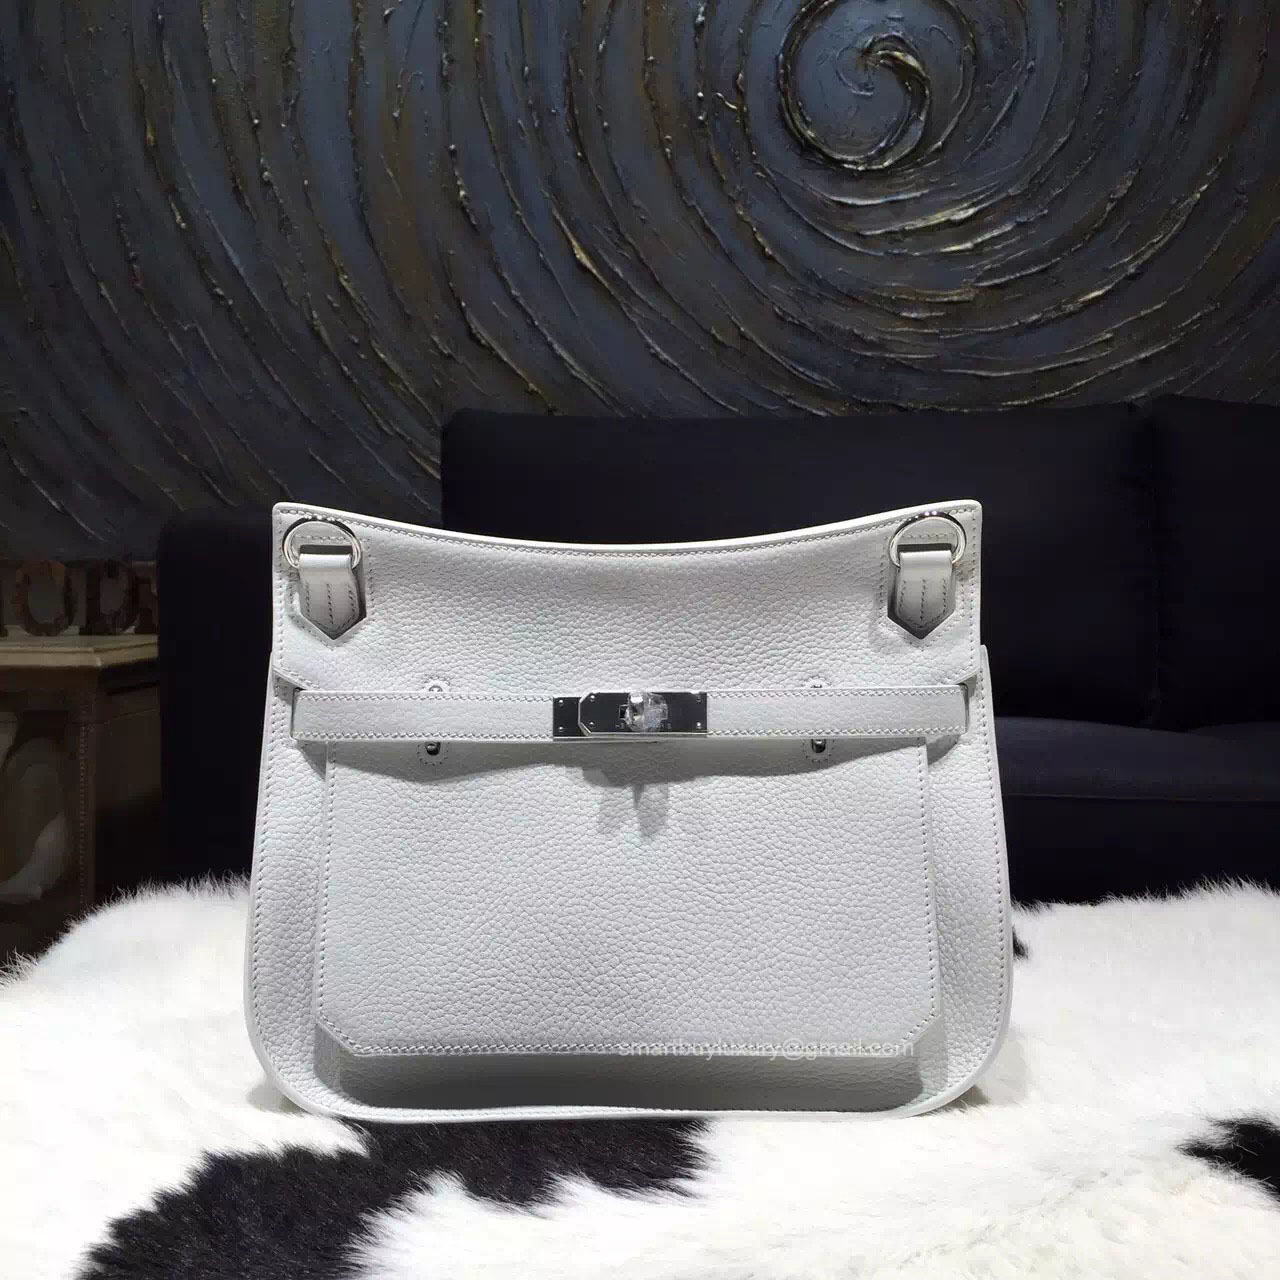 Hermes Jypsiere 28 Bag White Taurillon Clemence Handstitched